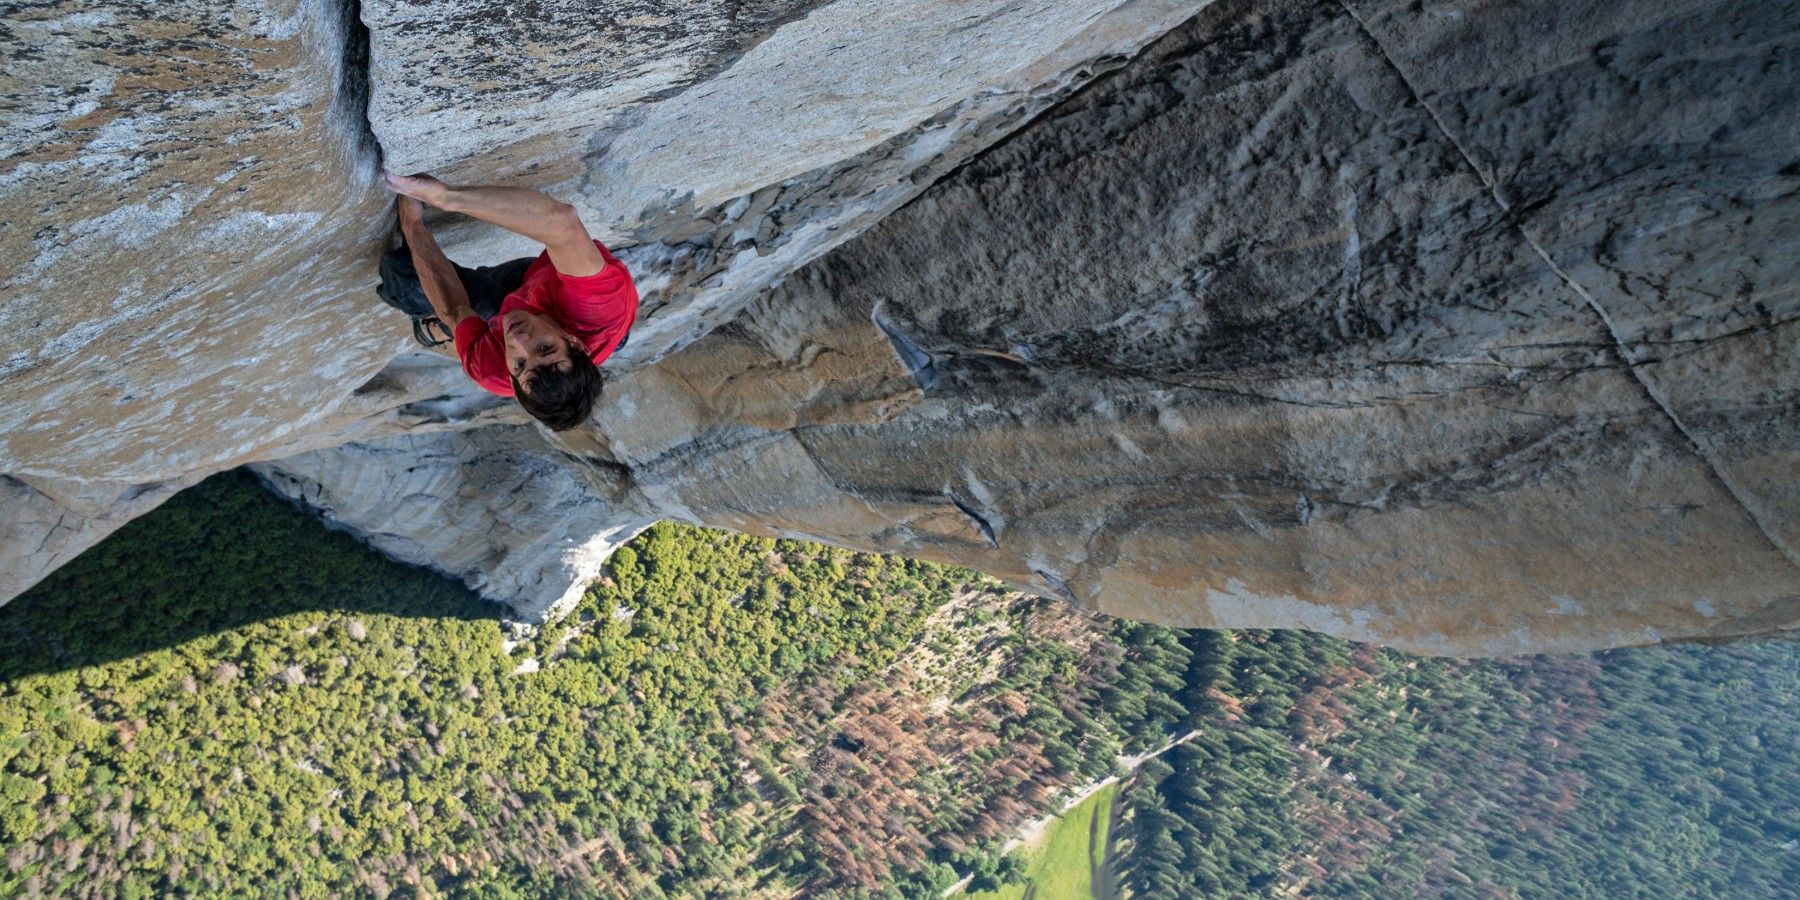 A scene from Free Solo.